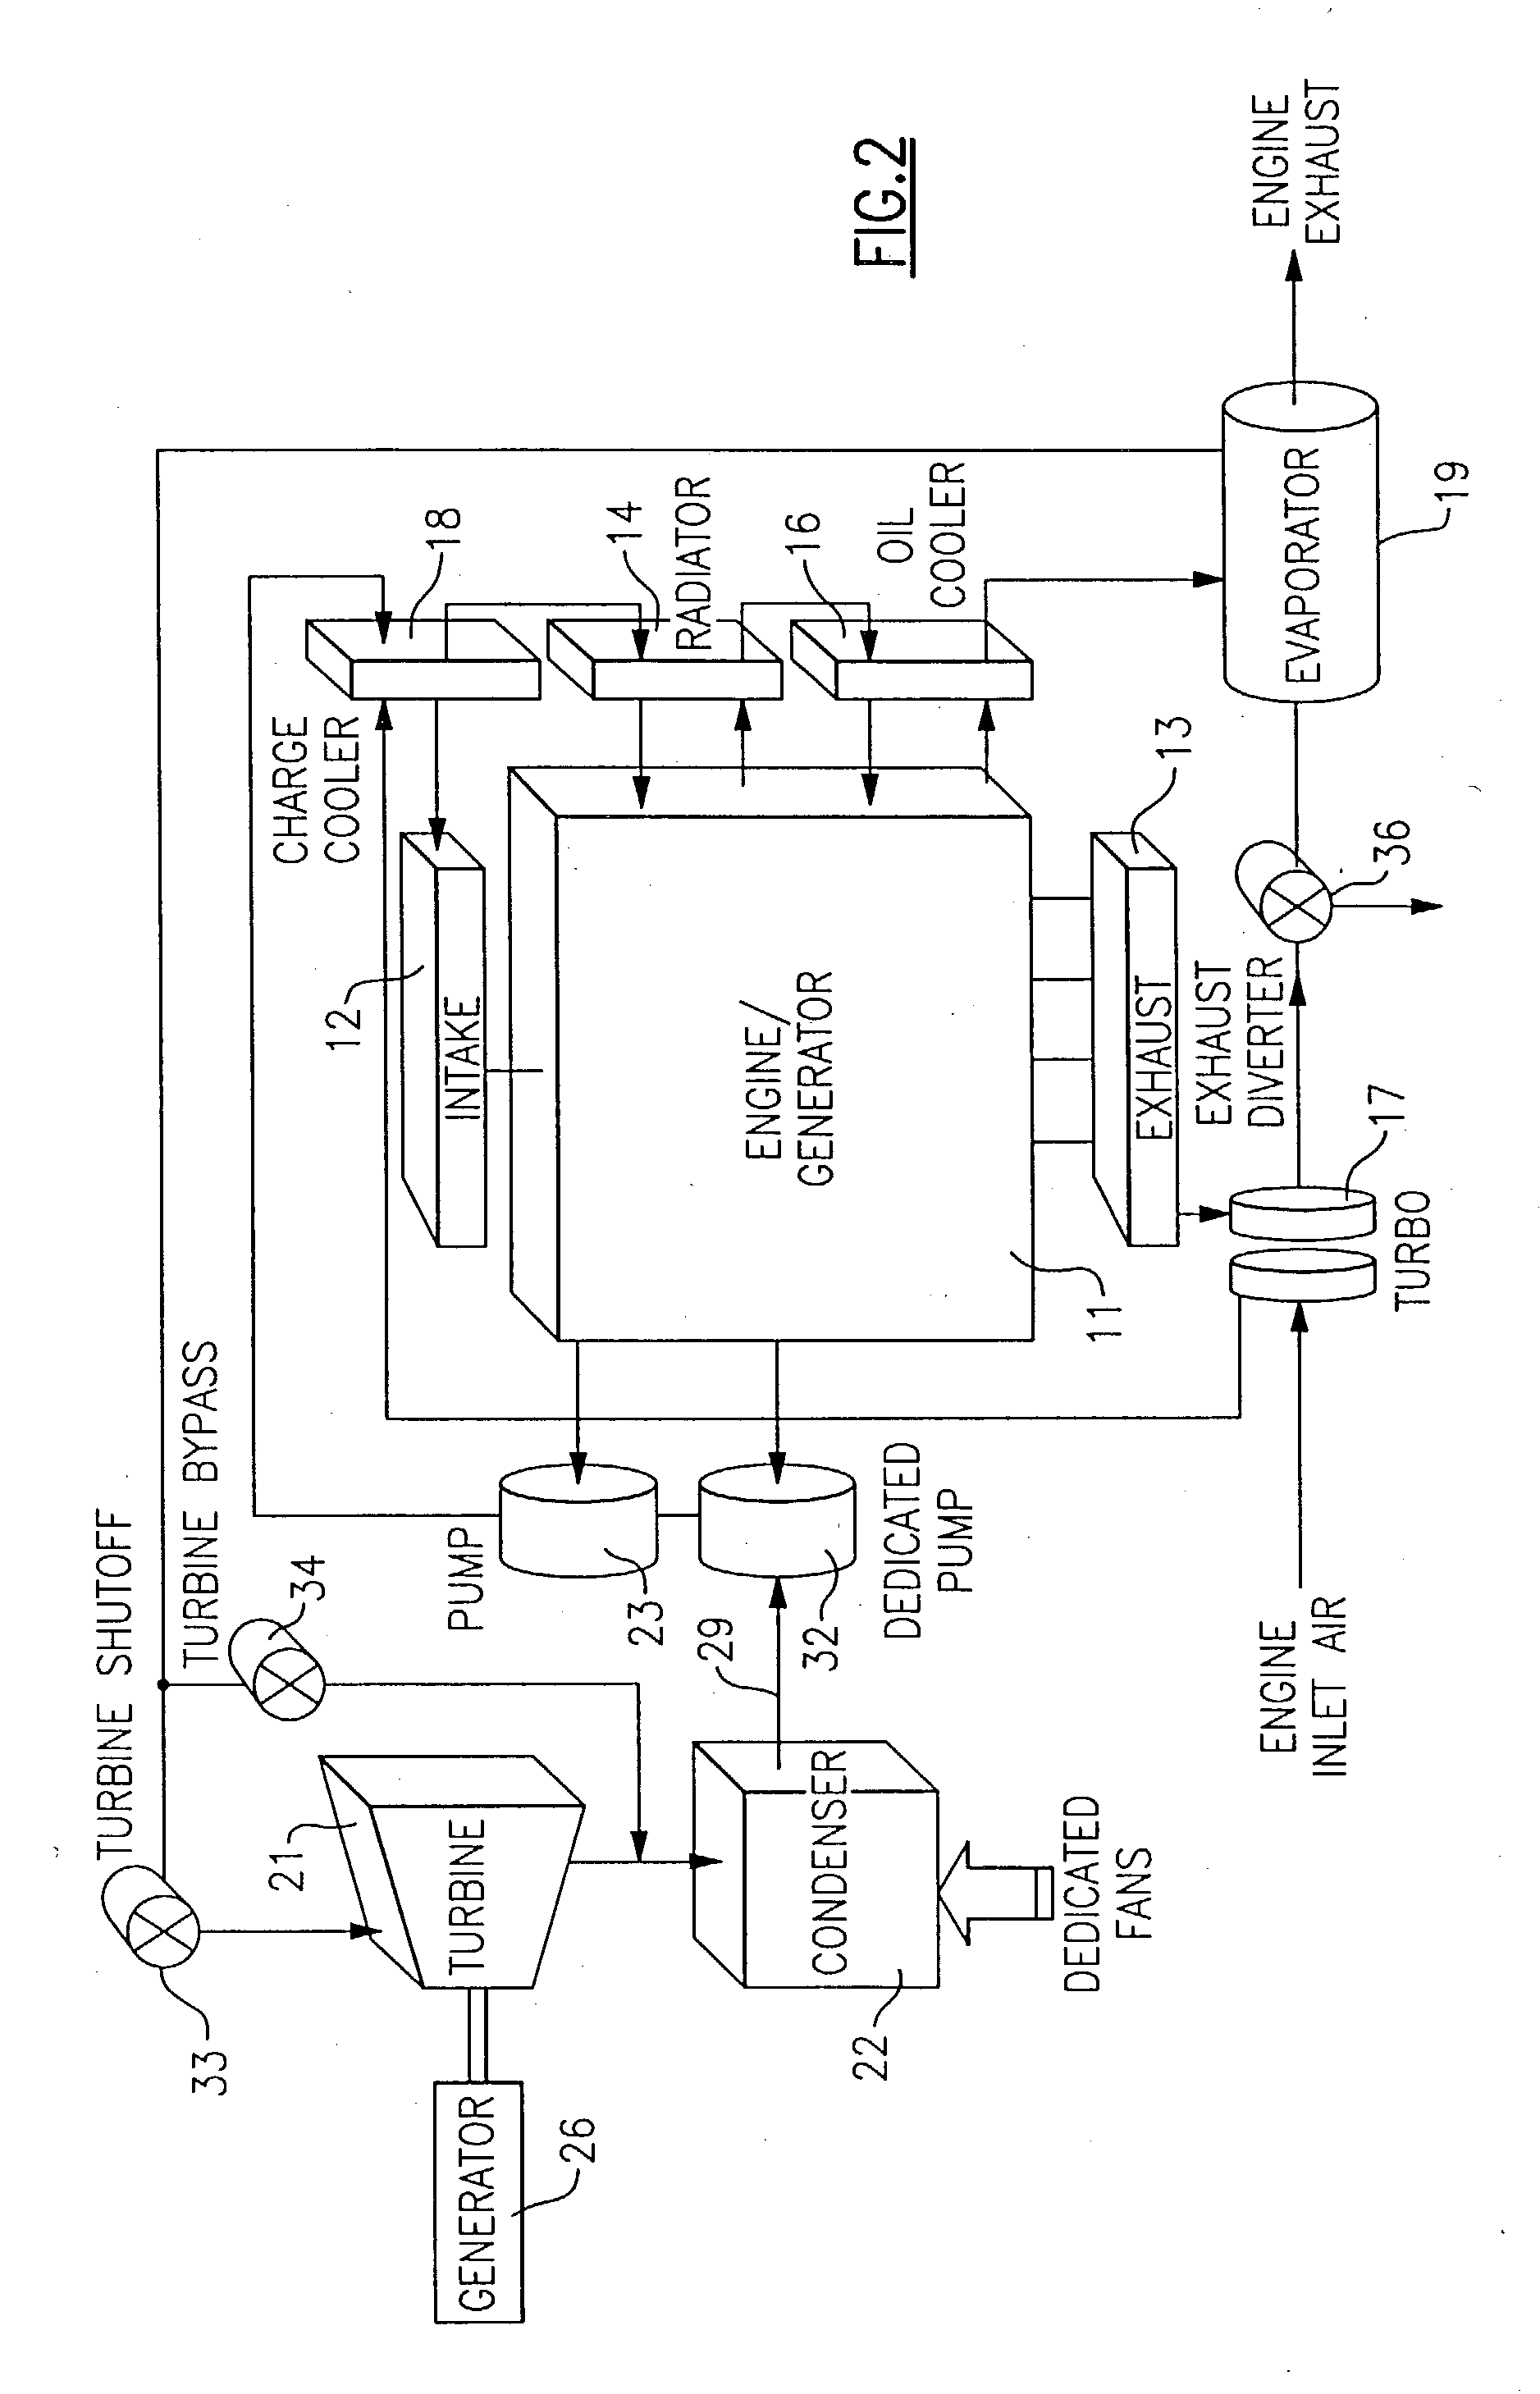 Organic rankine cycle system for use with a reciprocating engine